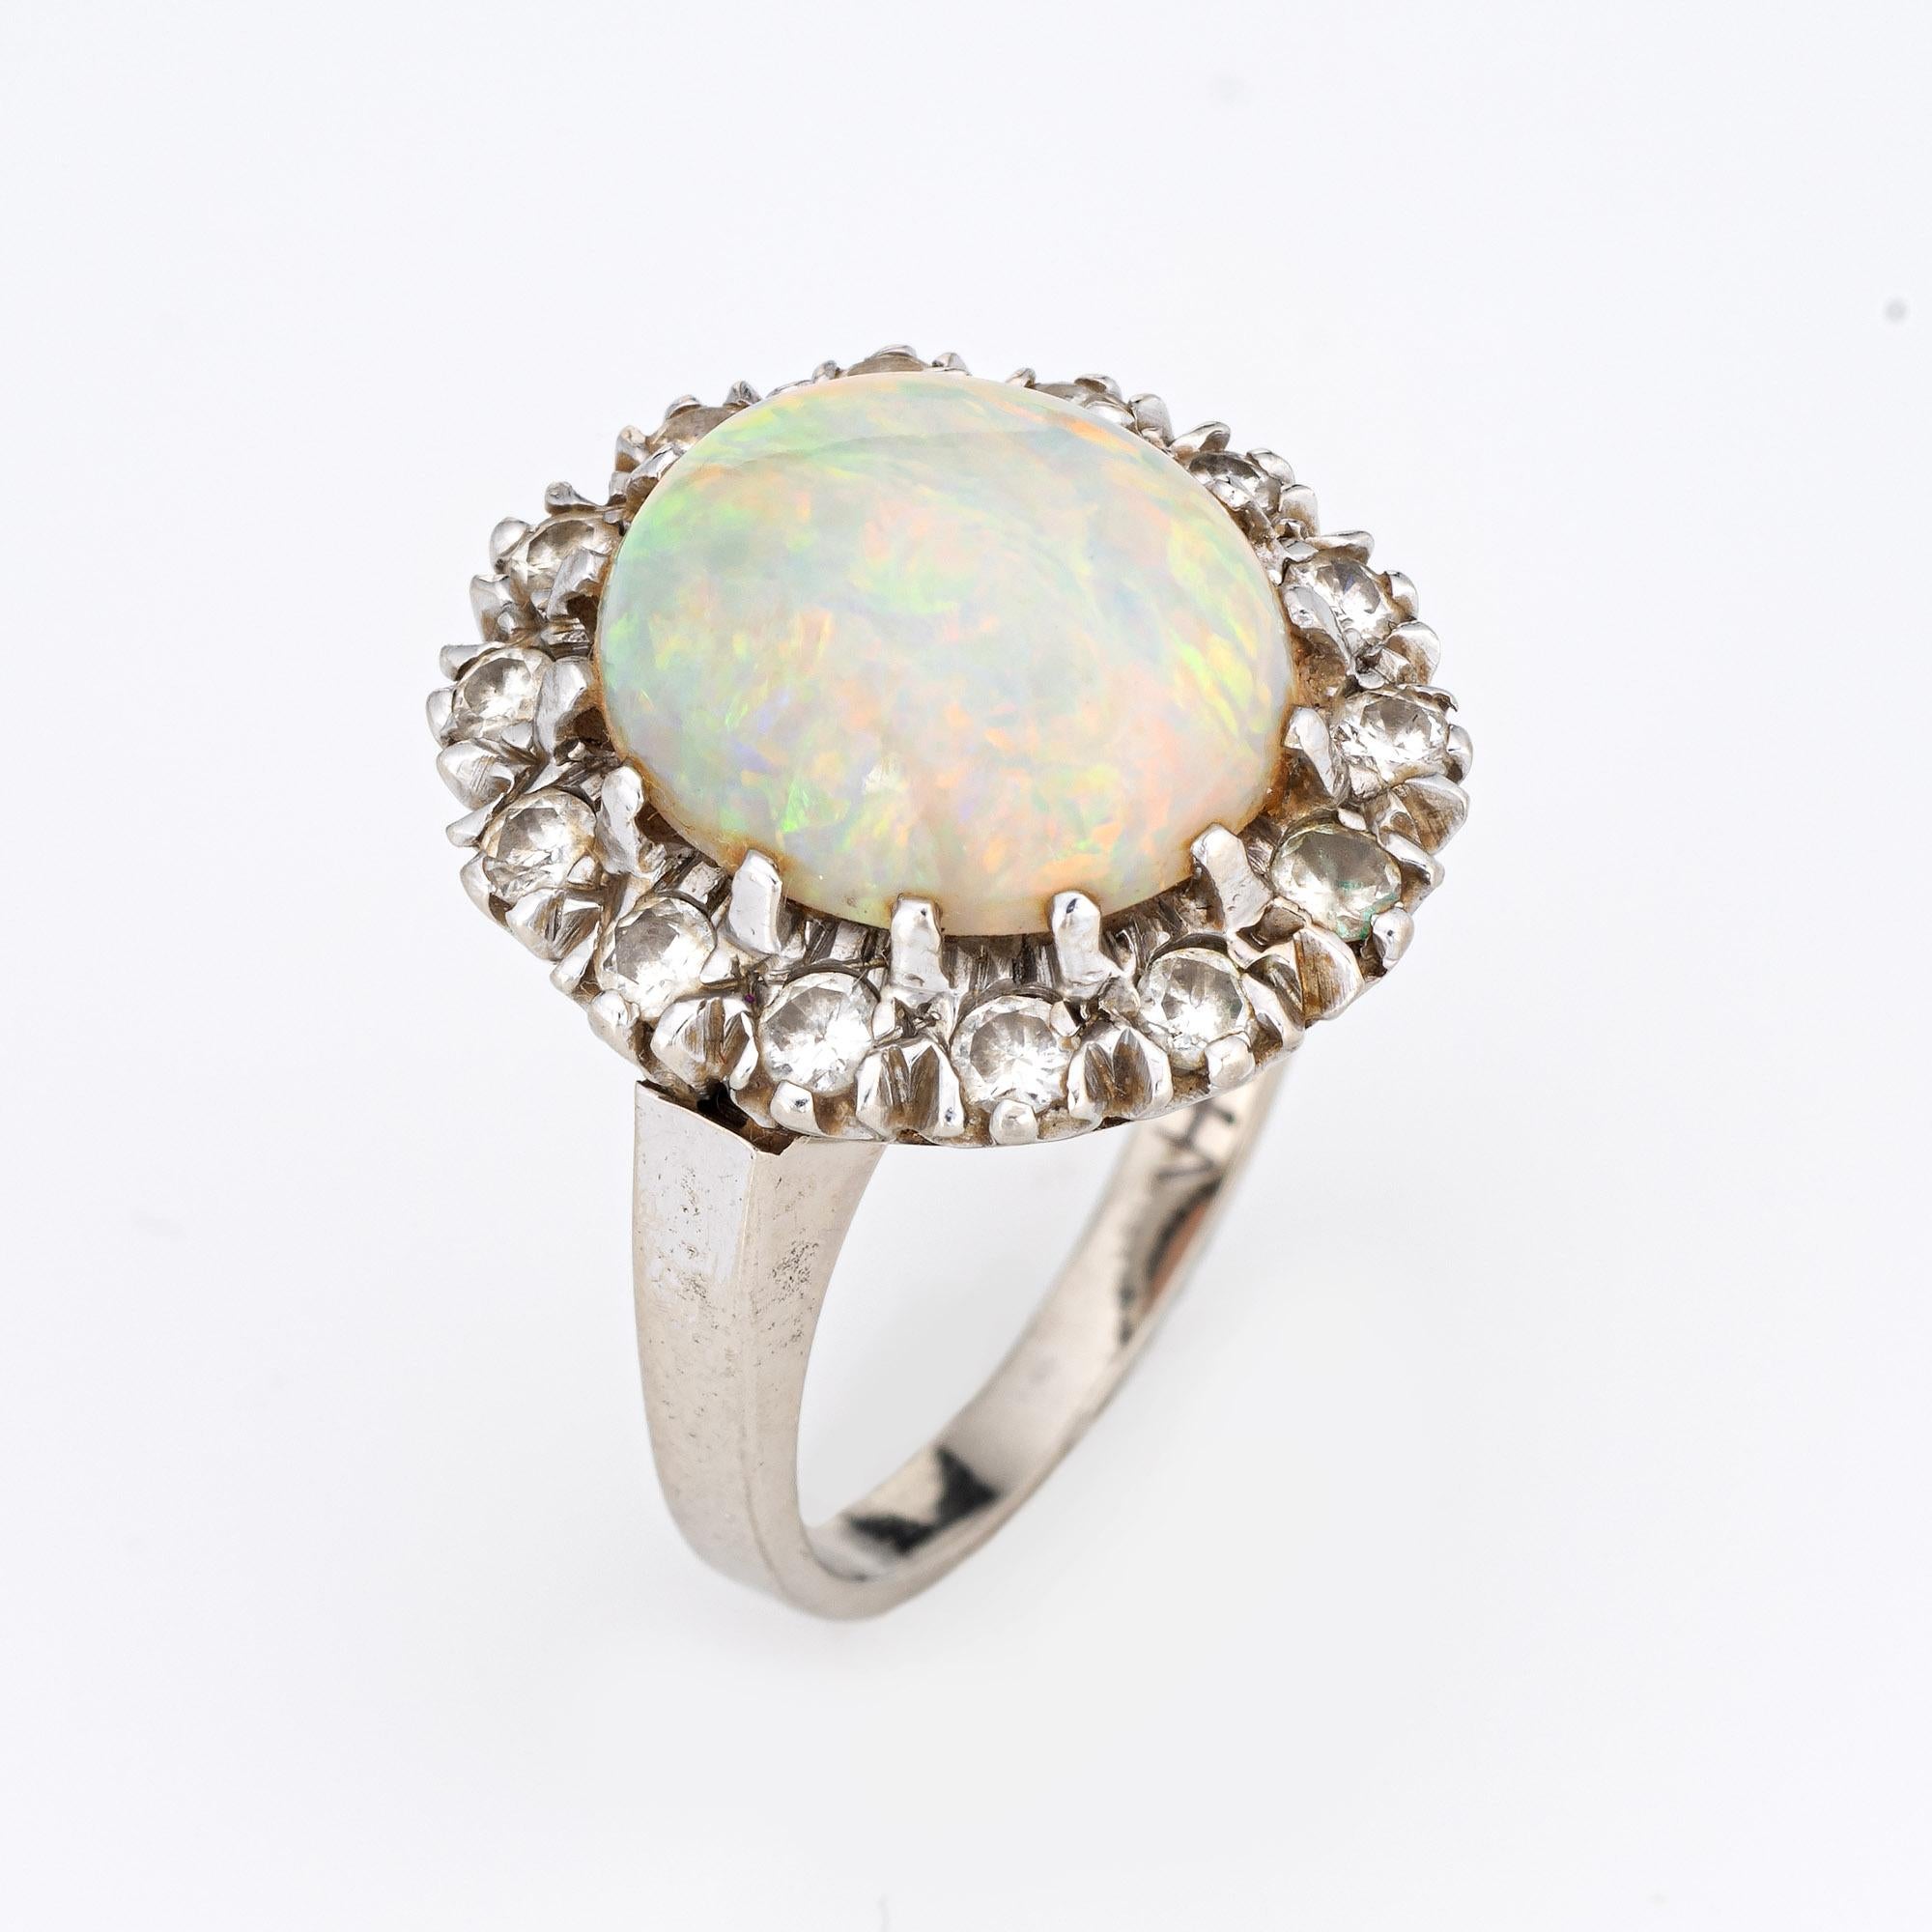 Finely detailed vintage opal & diamond cocktail ring (circa 1950s to 1960s), crafted in 14 karat white gold. 

Solid natural opal measures 12mm x 10mm (estimated at 5 carats) accented with 14 estimated 0.05 carat round brilliant cut diamonds. The